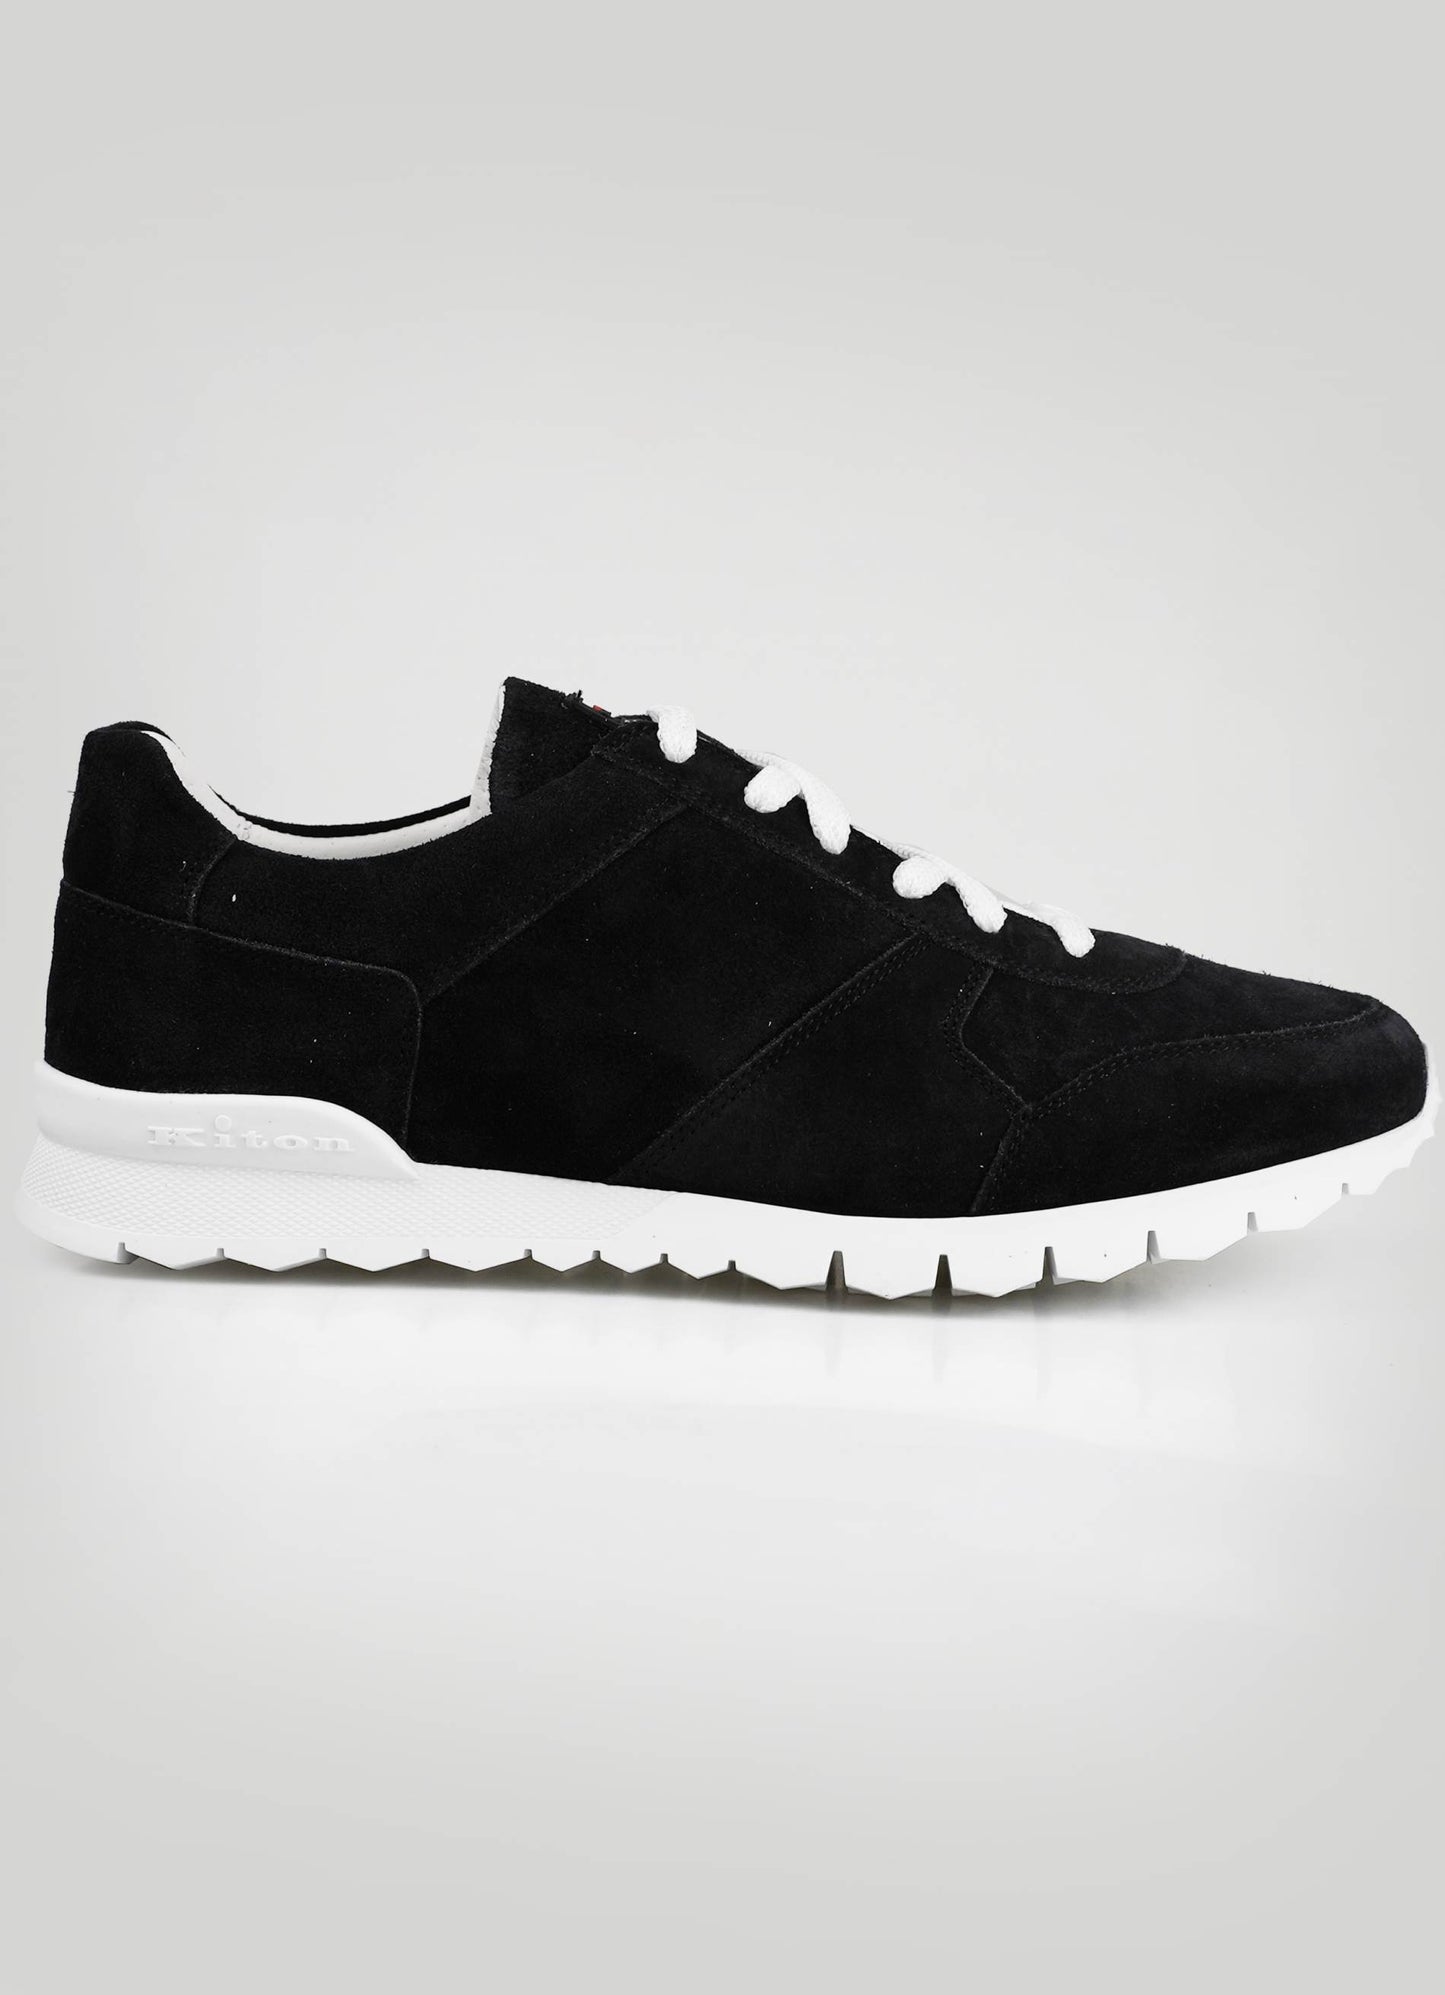 Kiton Black Leather Suede Sneakers